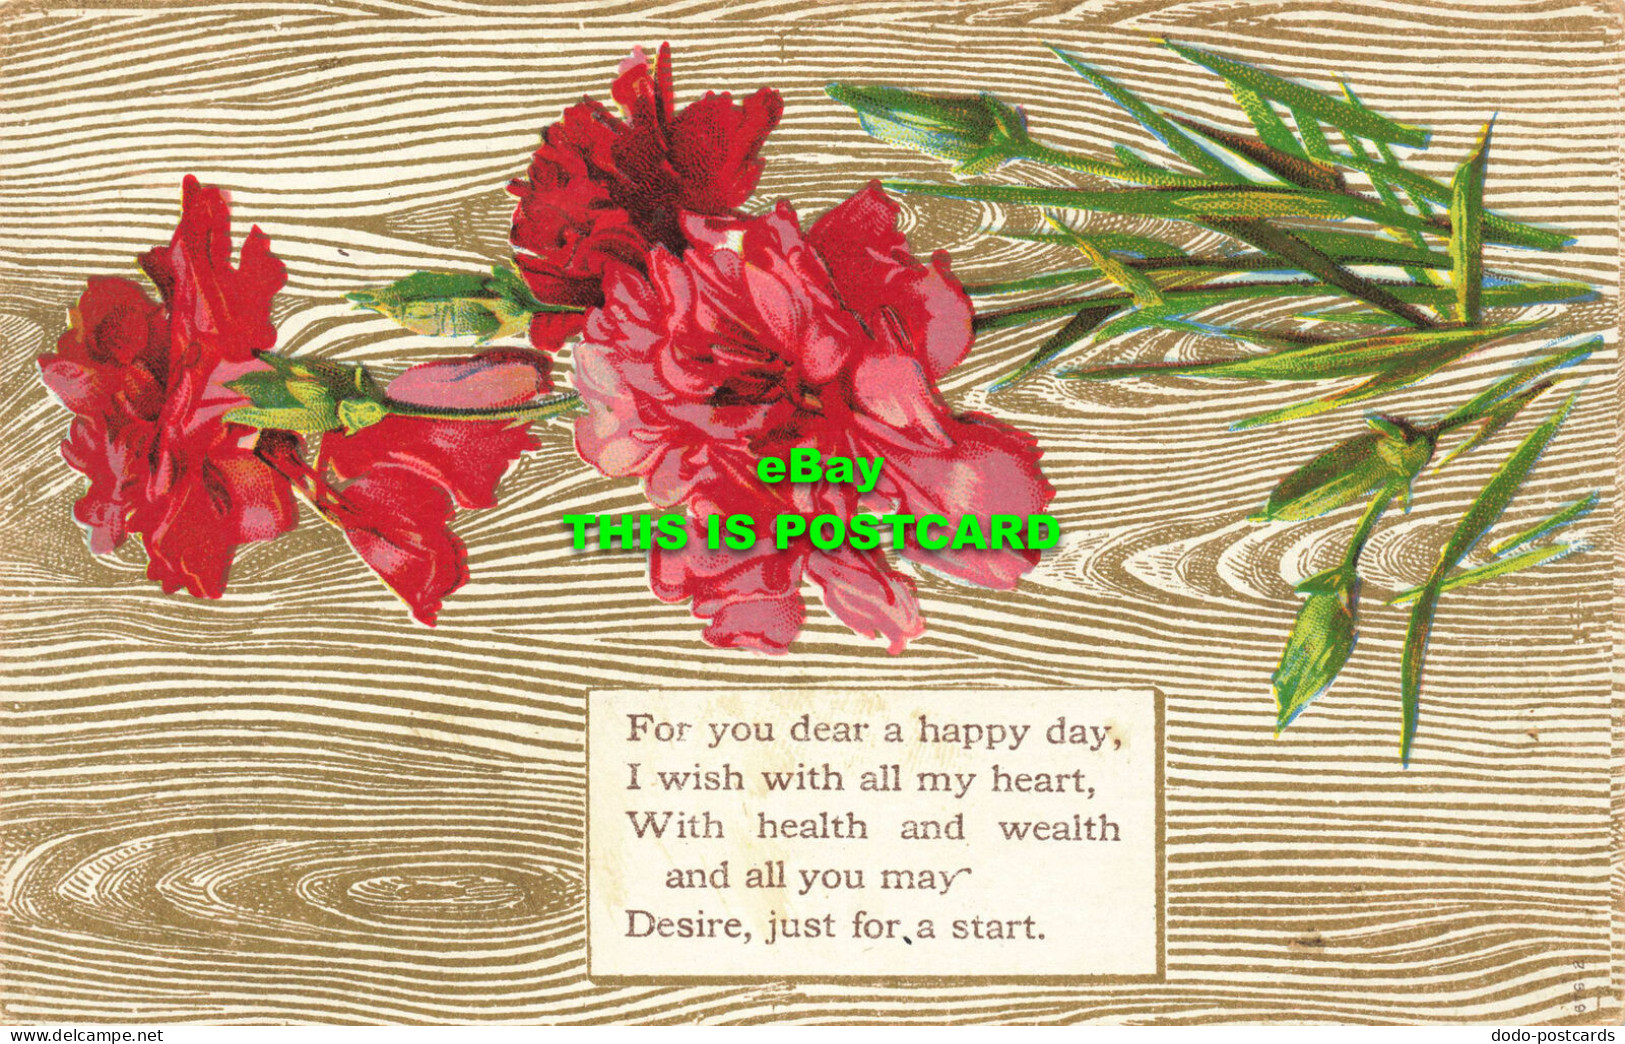 R596055 For You Dear A Happy Day I Wish With All My Heart. Greeting Card - Monde